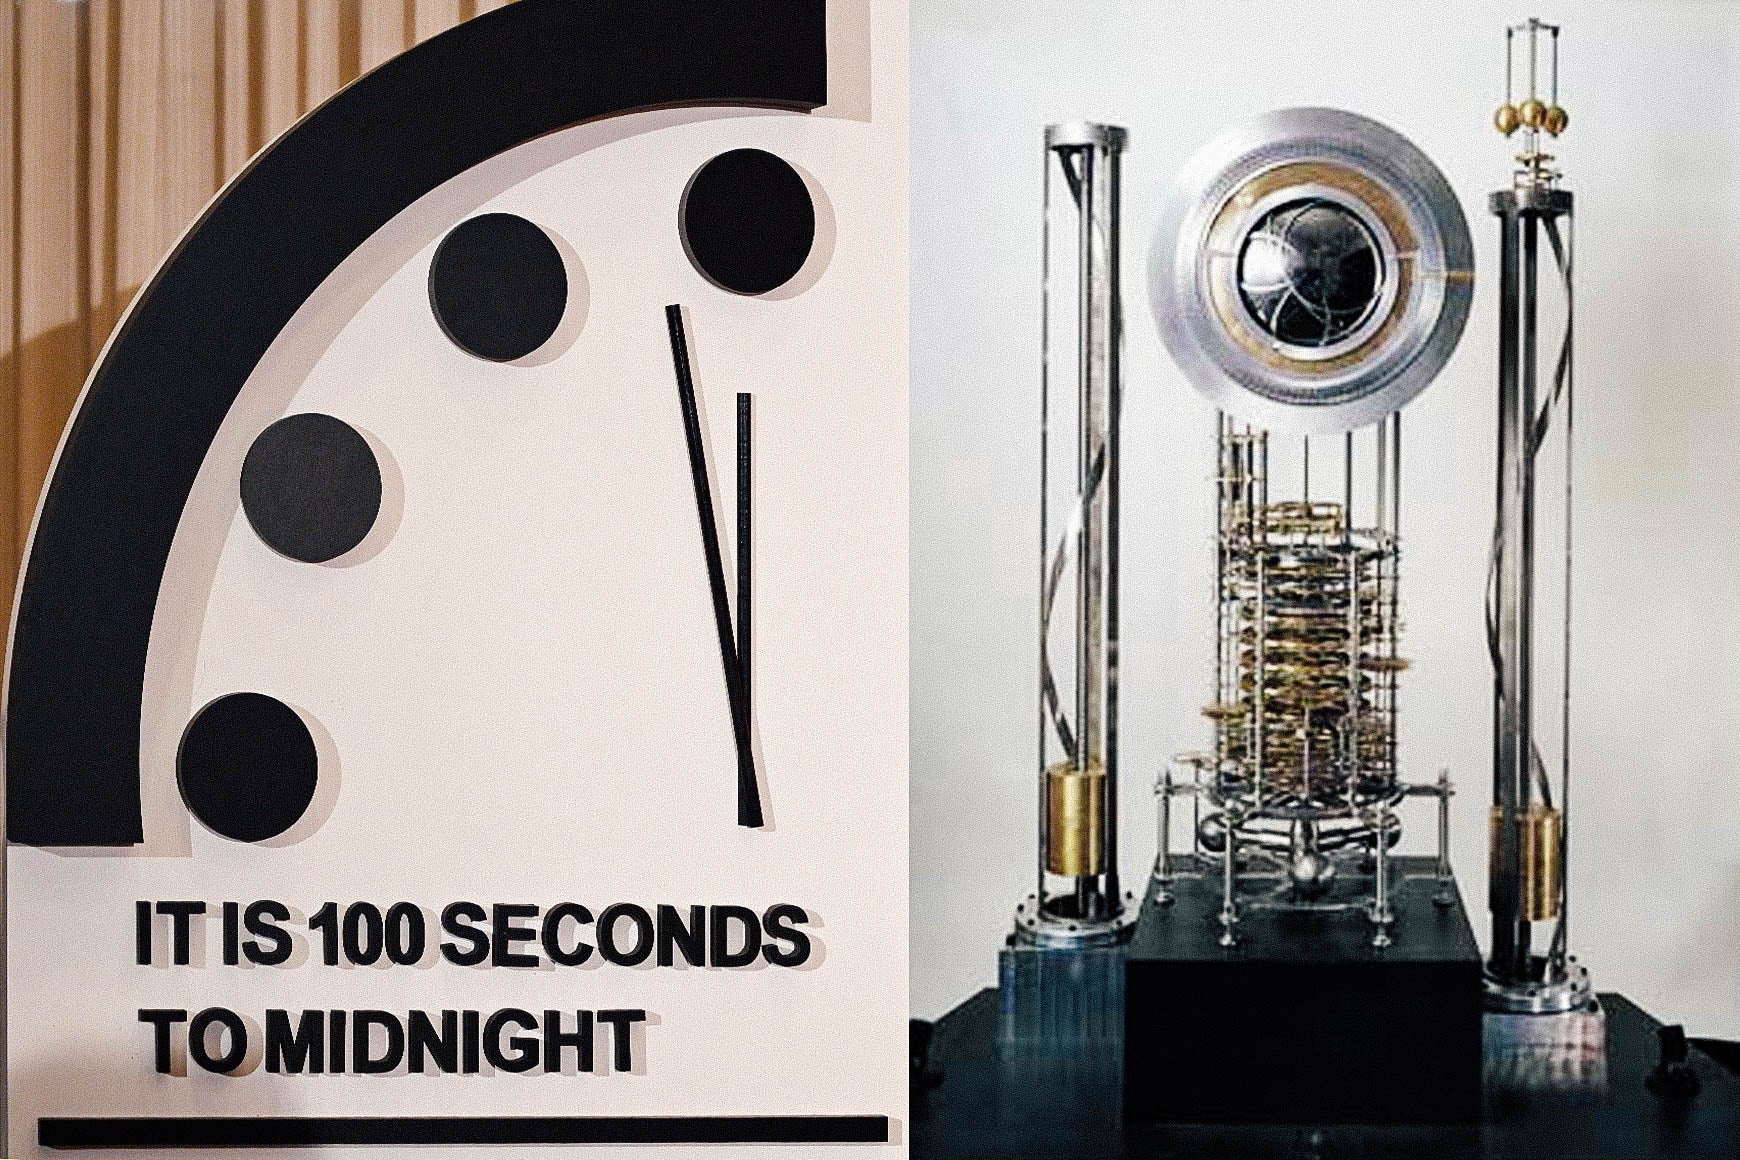 What is the Doomsday Clock really counting down toward?